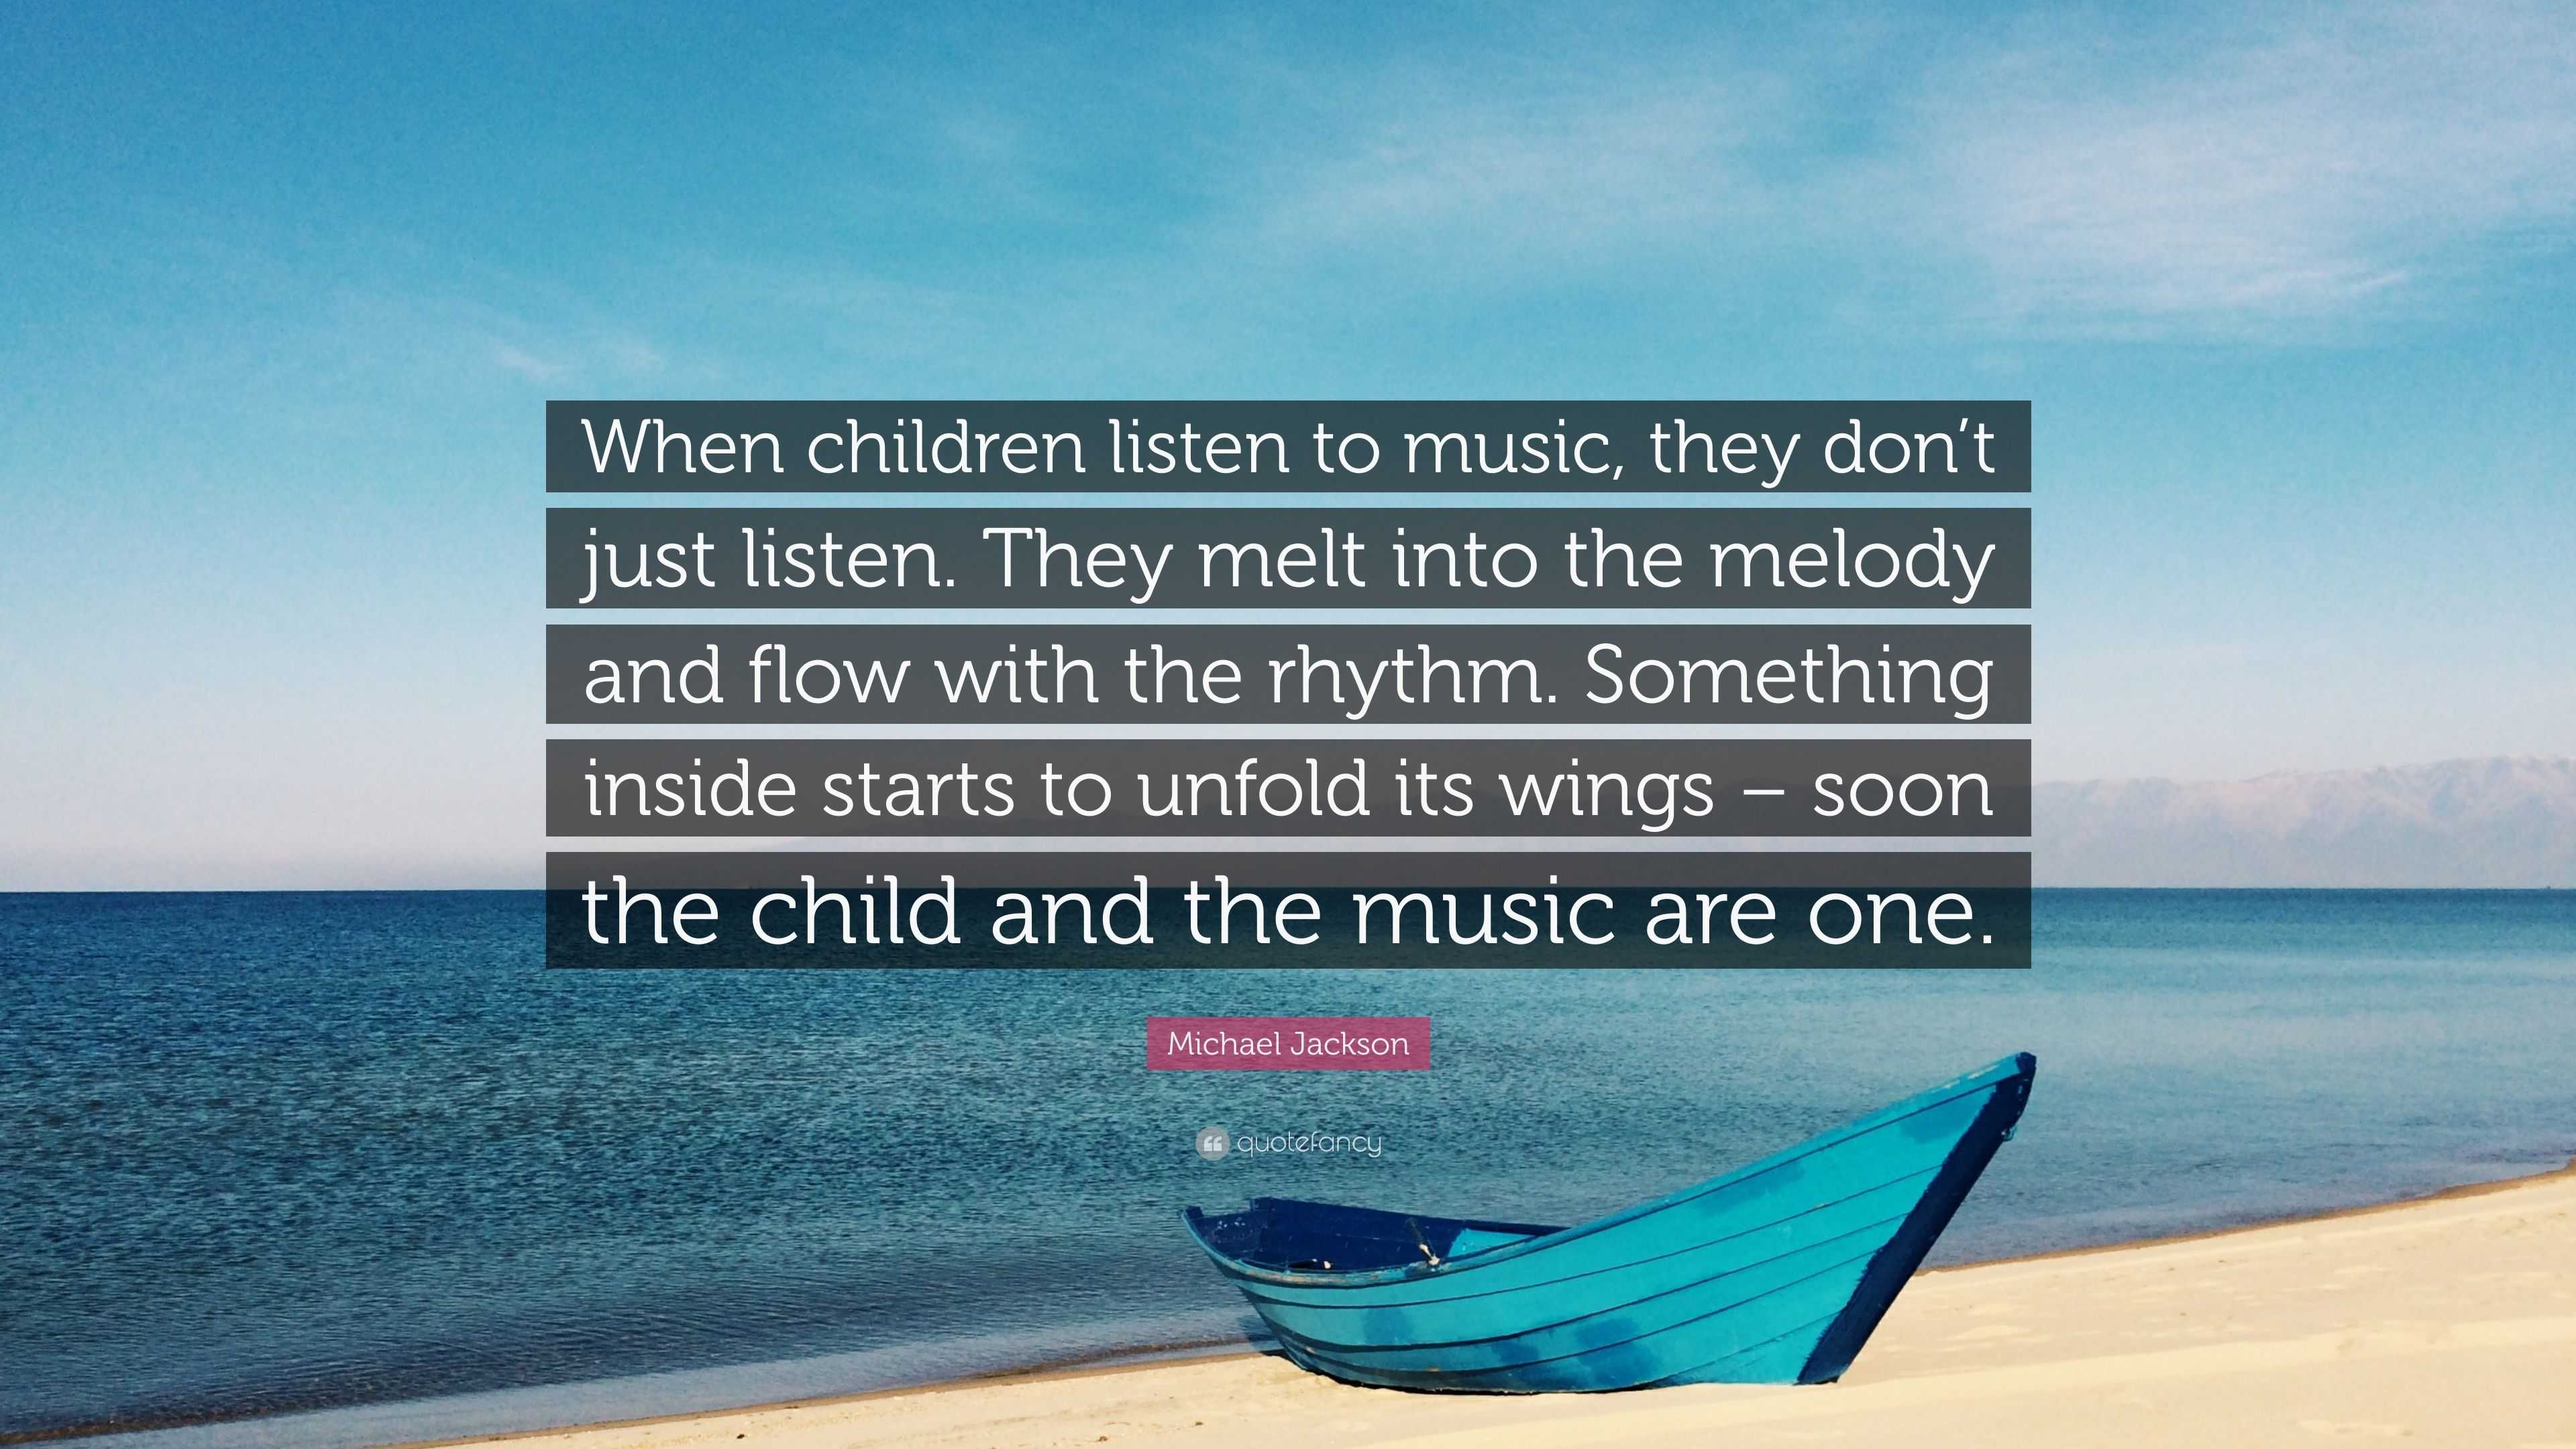 Michael Jackson Quote: “When children listen to music, they don’t just